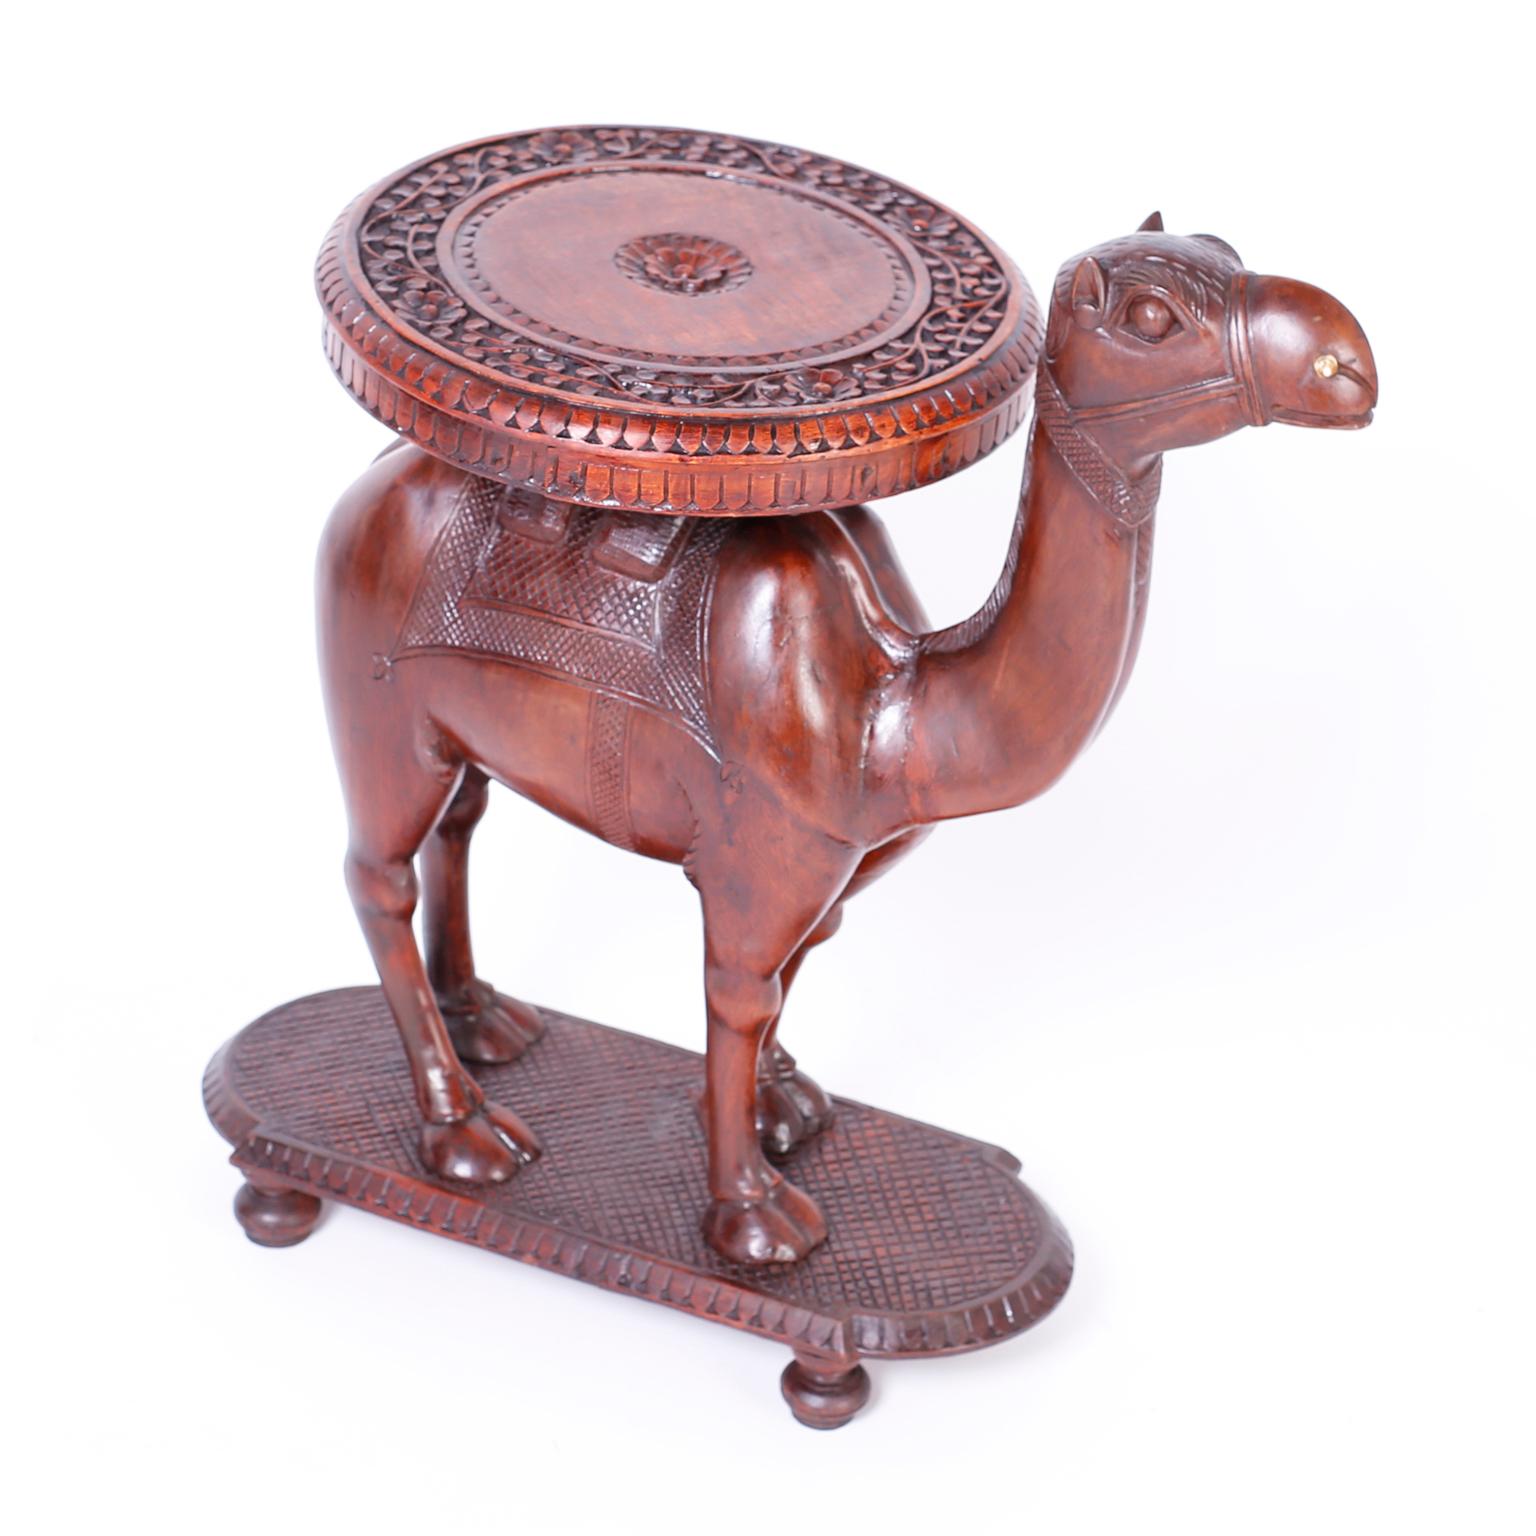 Anglo-Indian camel drinks or plant stand crafted in mahogany with a round tray carved with floral and geometric designs.